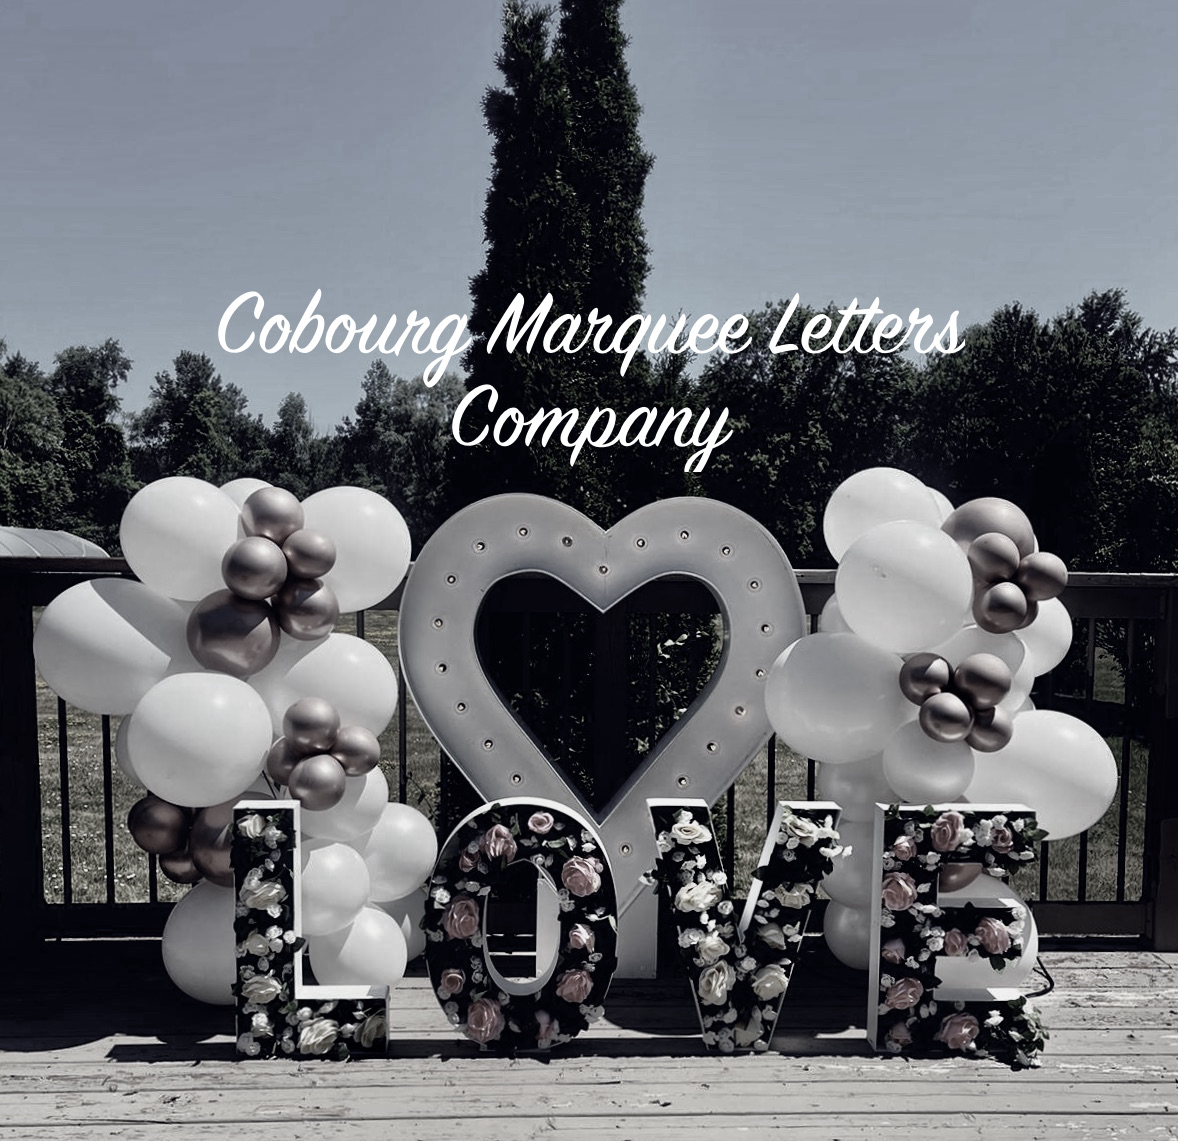 cobourg marquee letters company